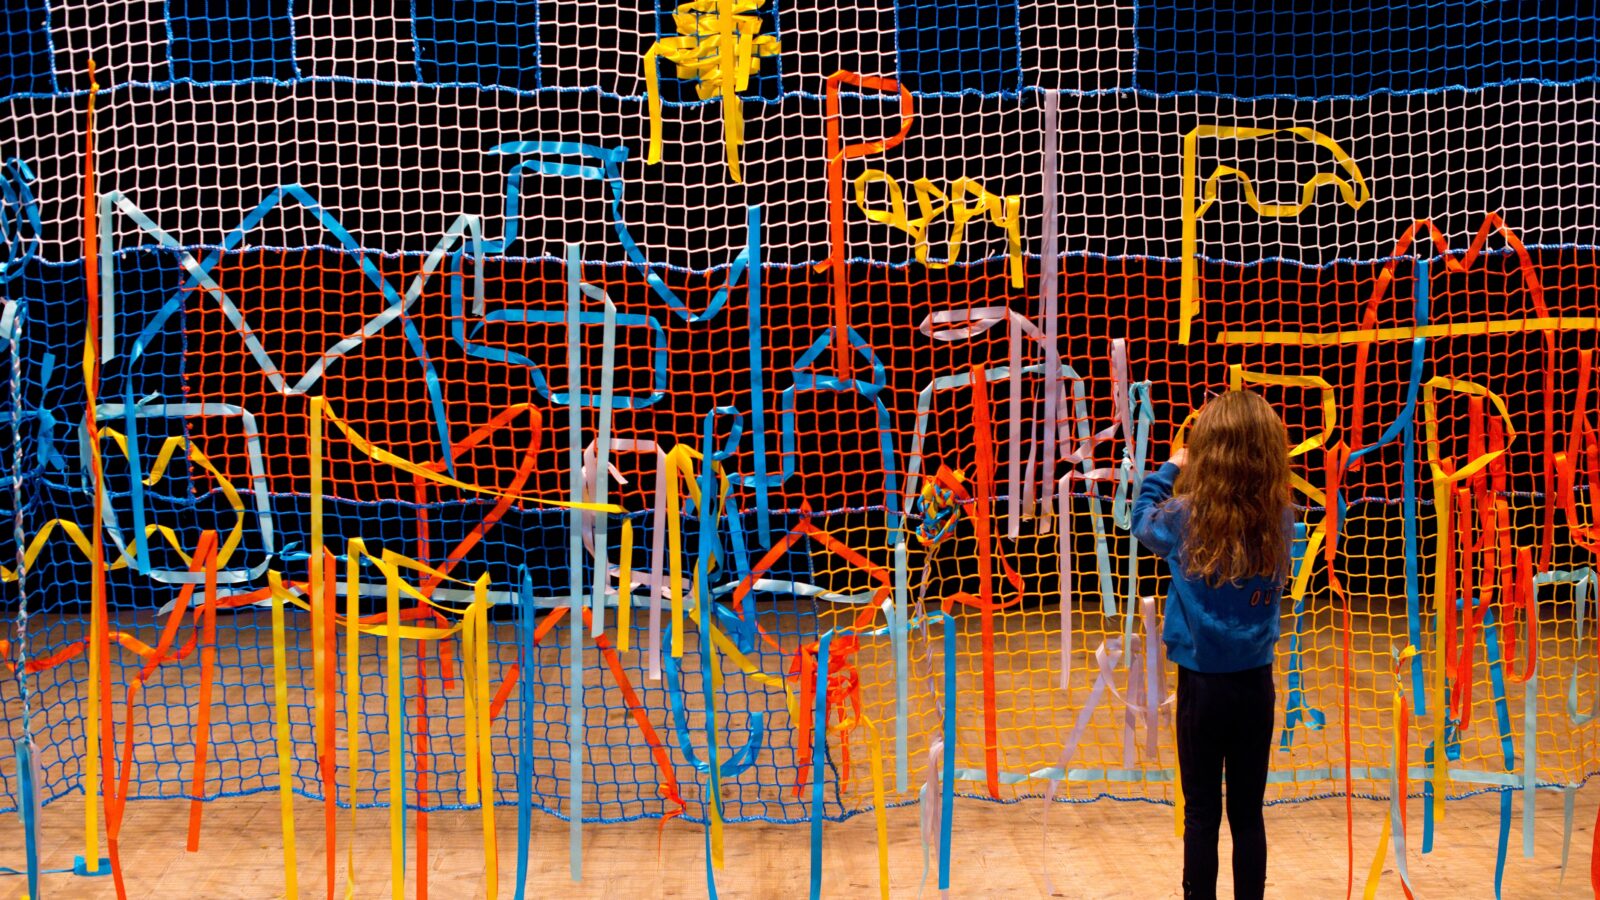 Image shows a lots of coloured fabric entangled in a large mesh wall. There is a young child with long brown hair with their back to the camera playing with the fabric.